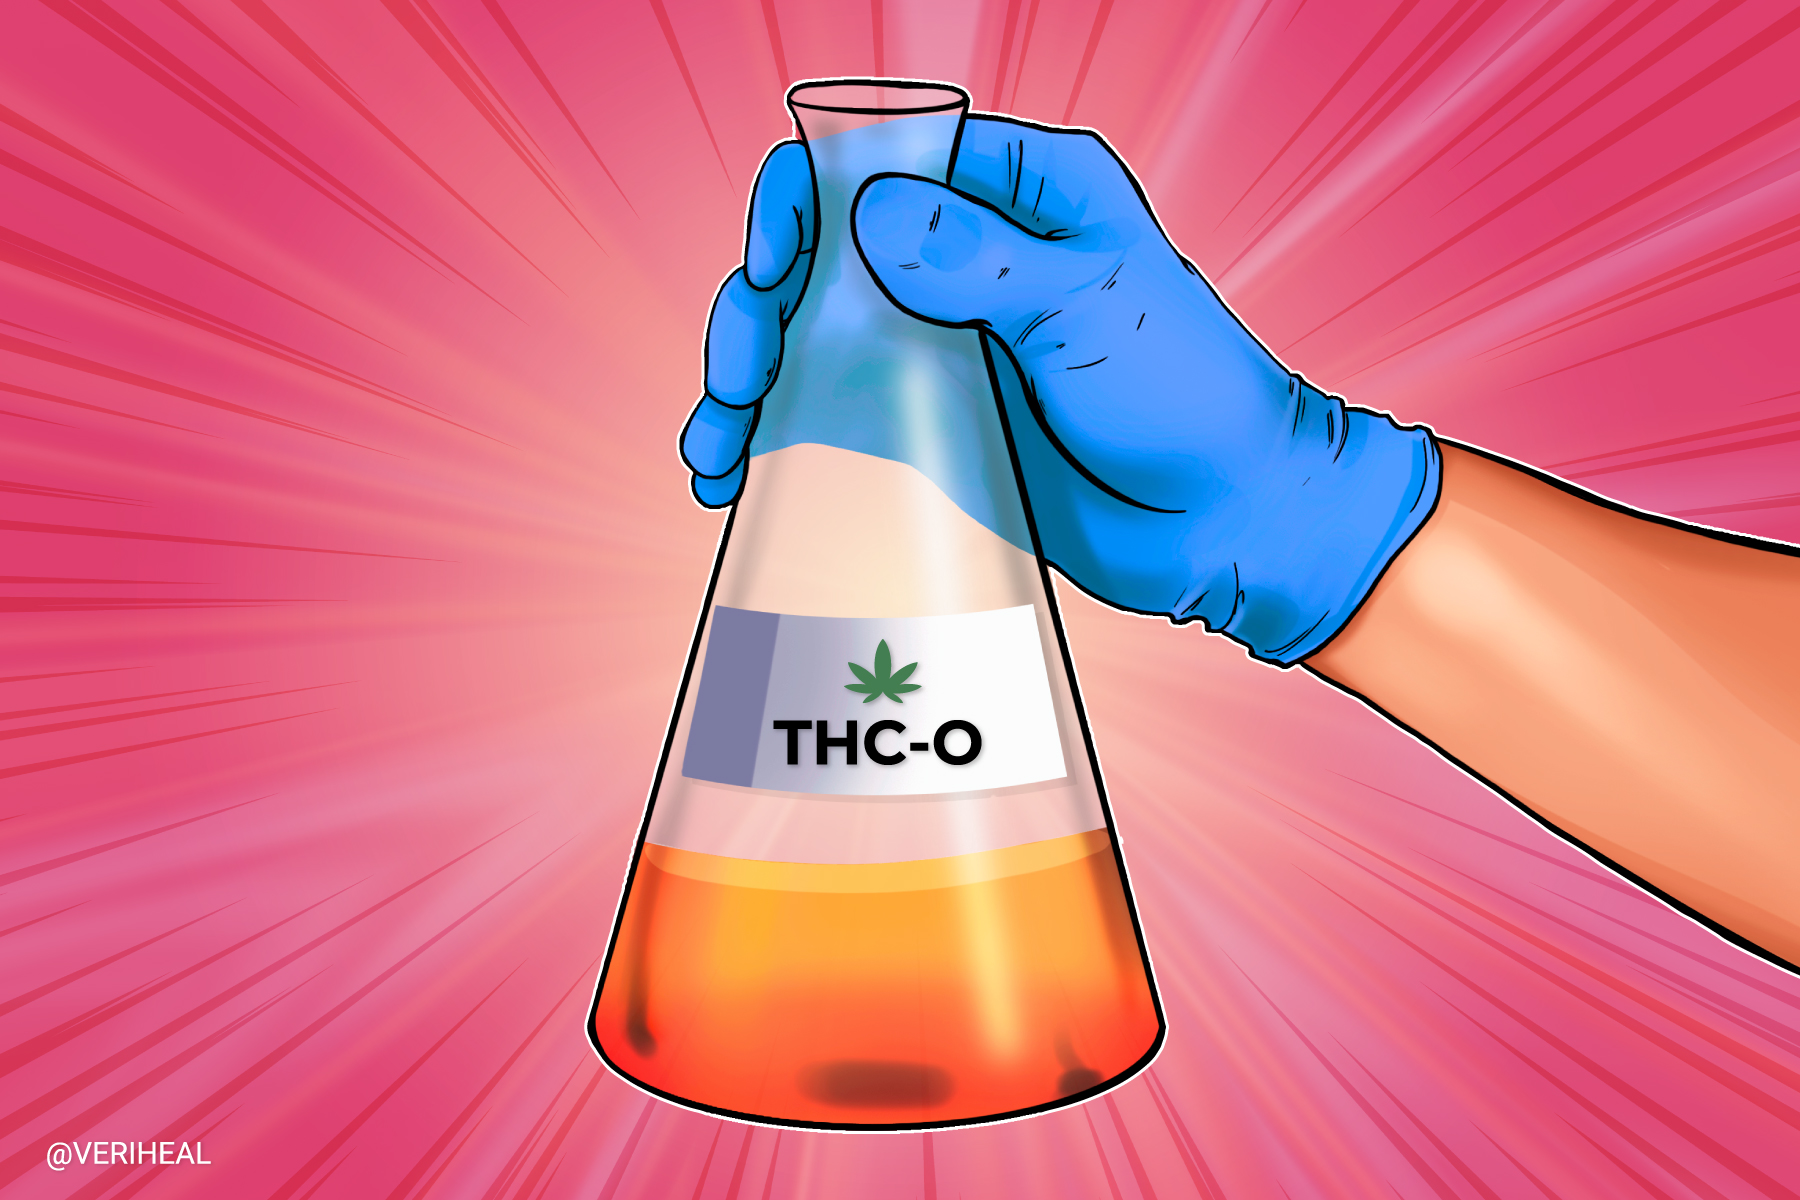 What You Should Know Before Giving THC-O a Go